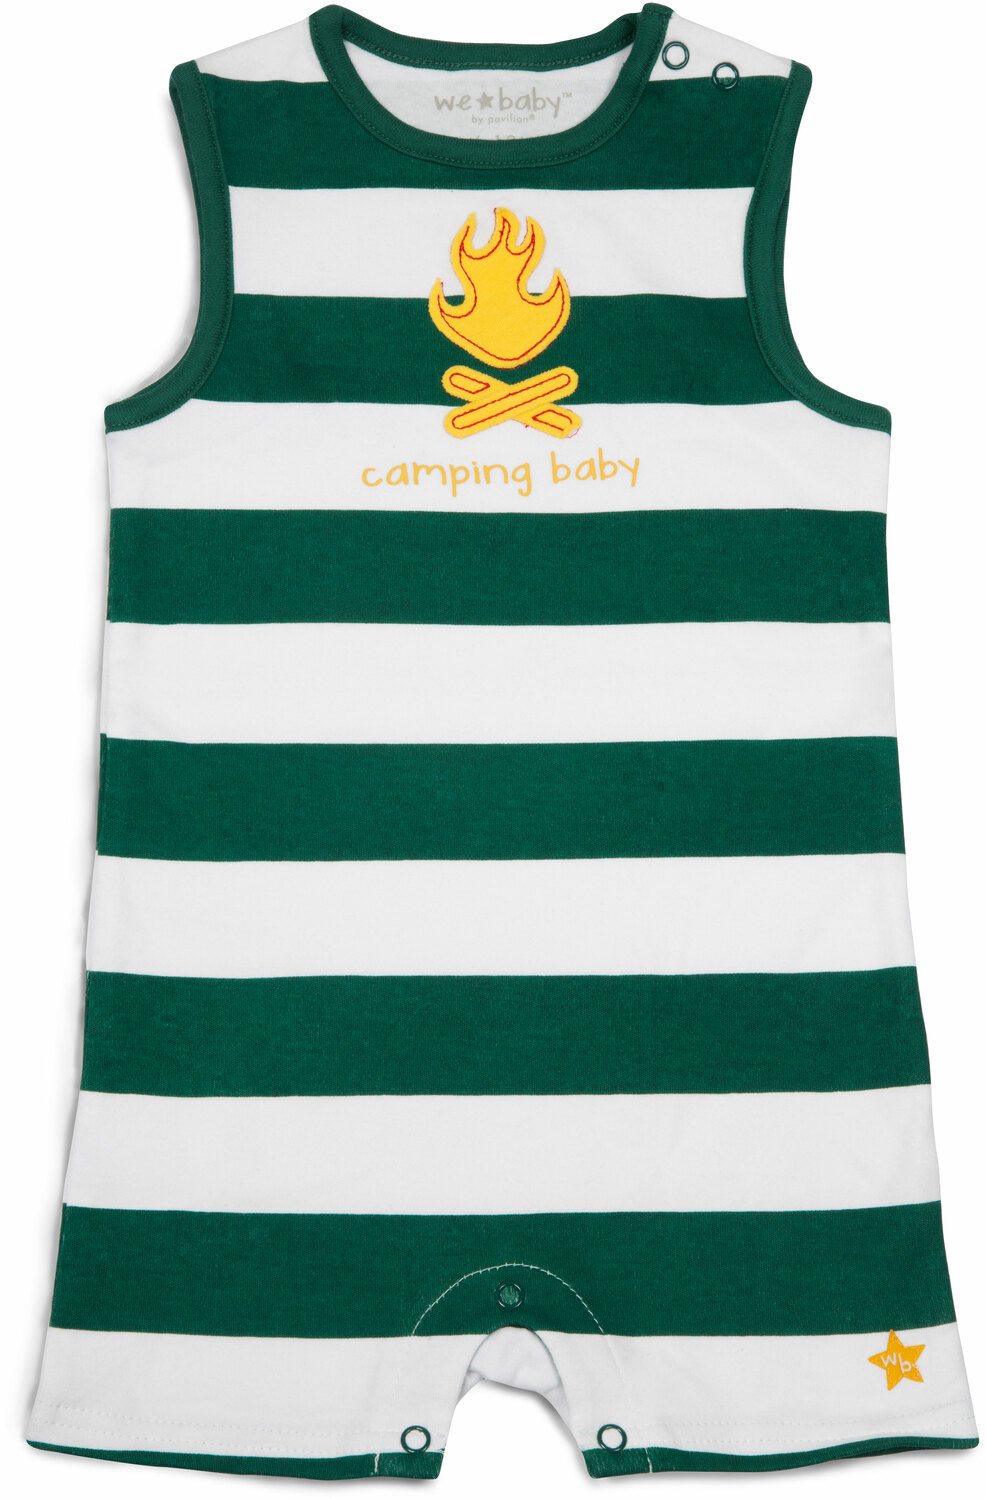 Camping Baby by We Baby - Camping Baby - 12-24 Month Boy Romper